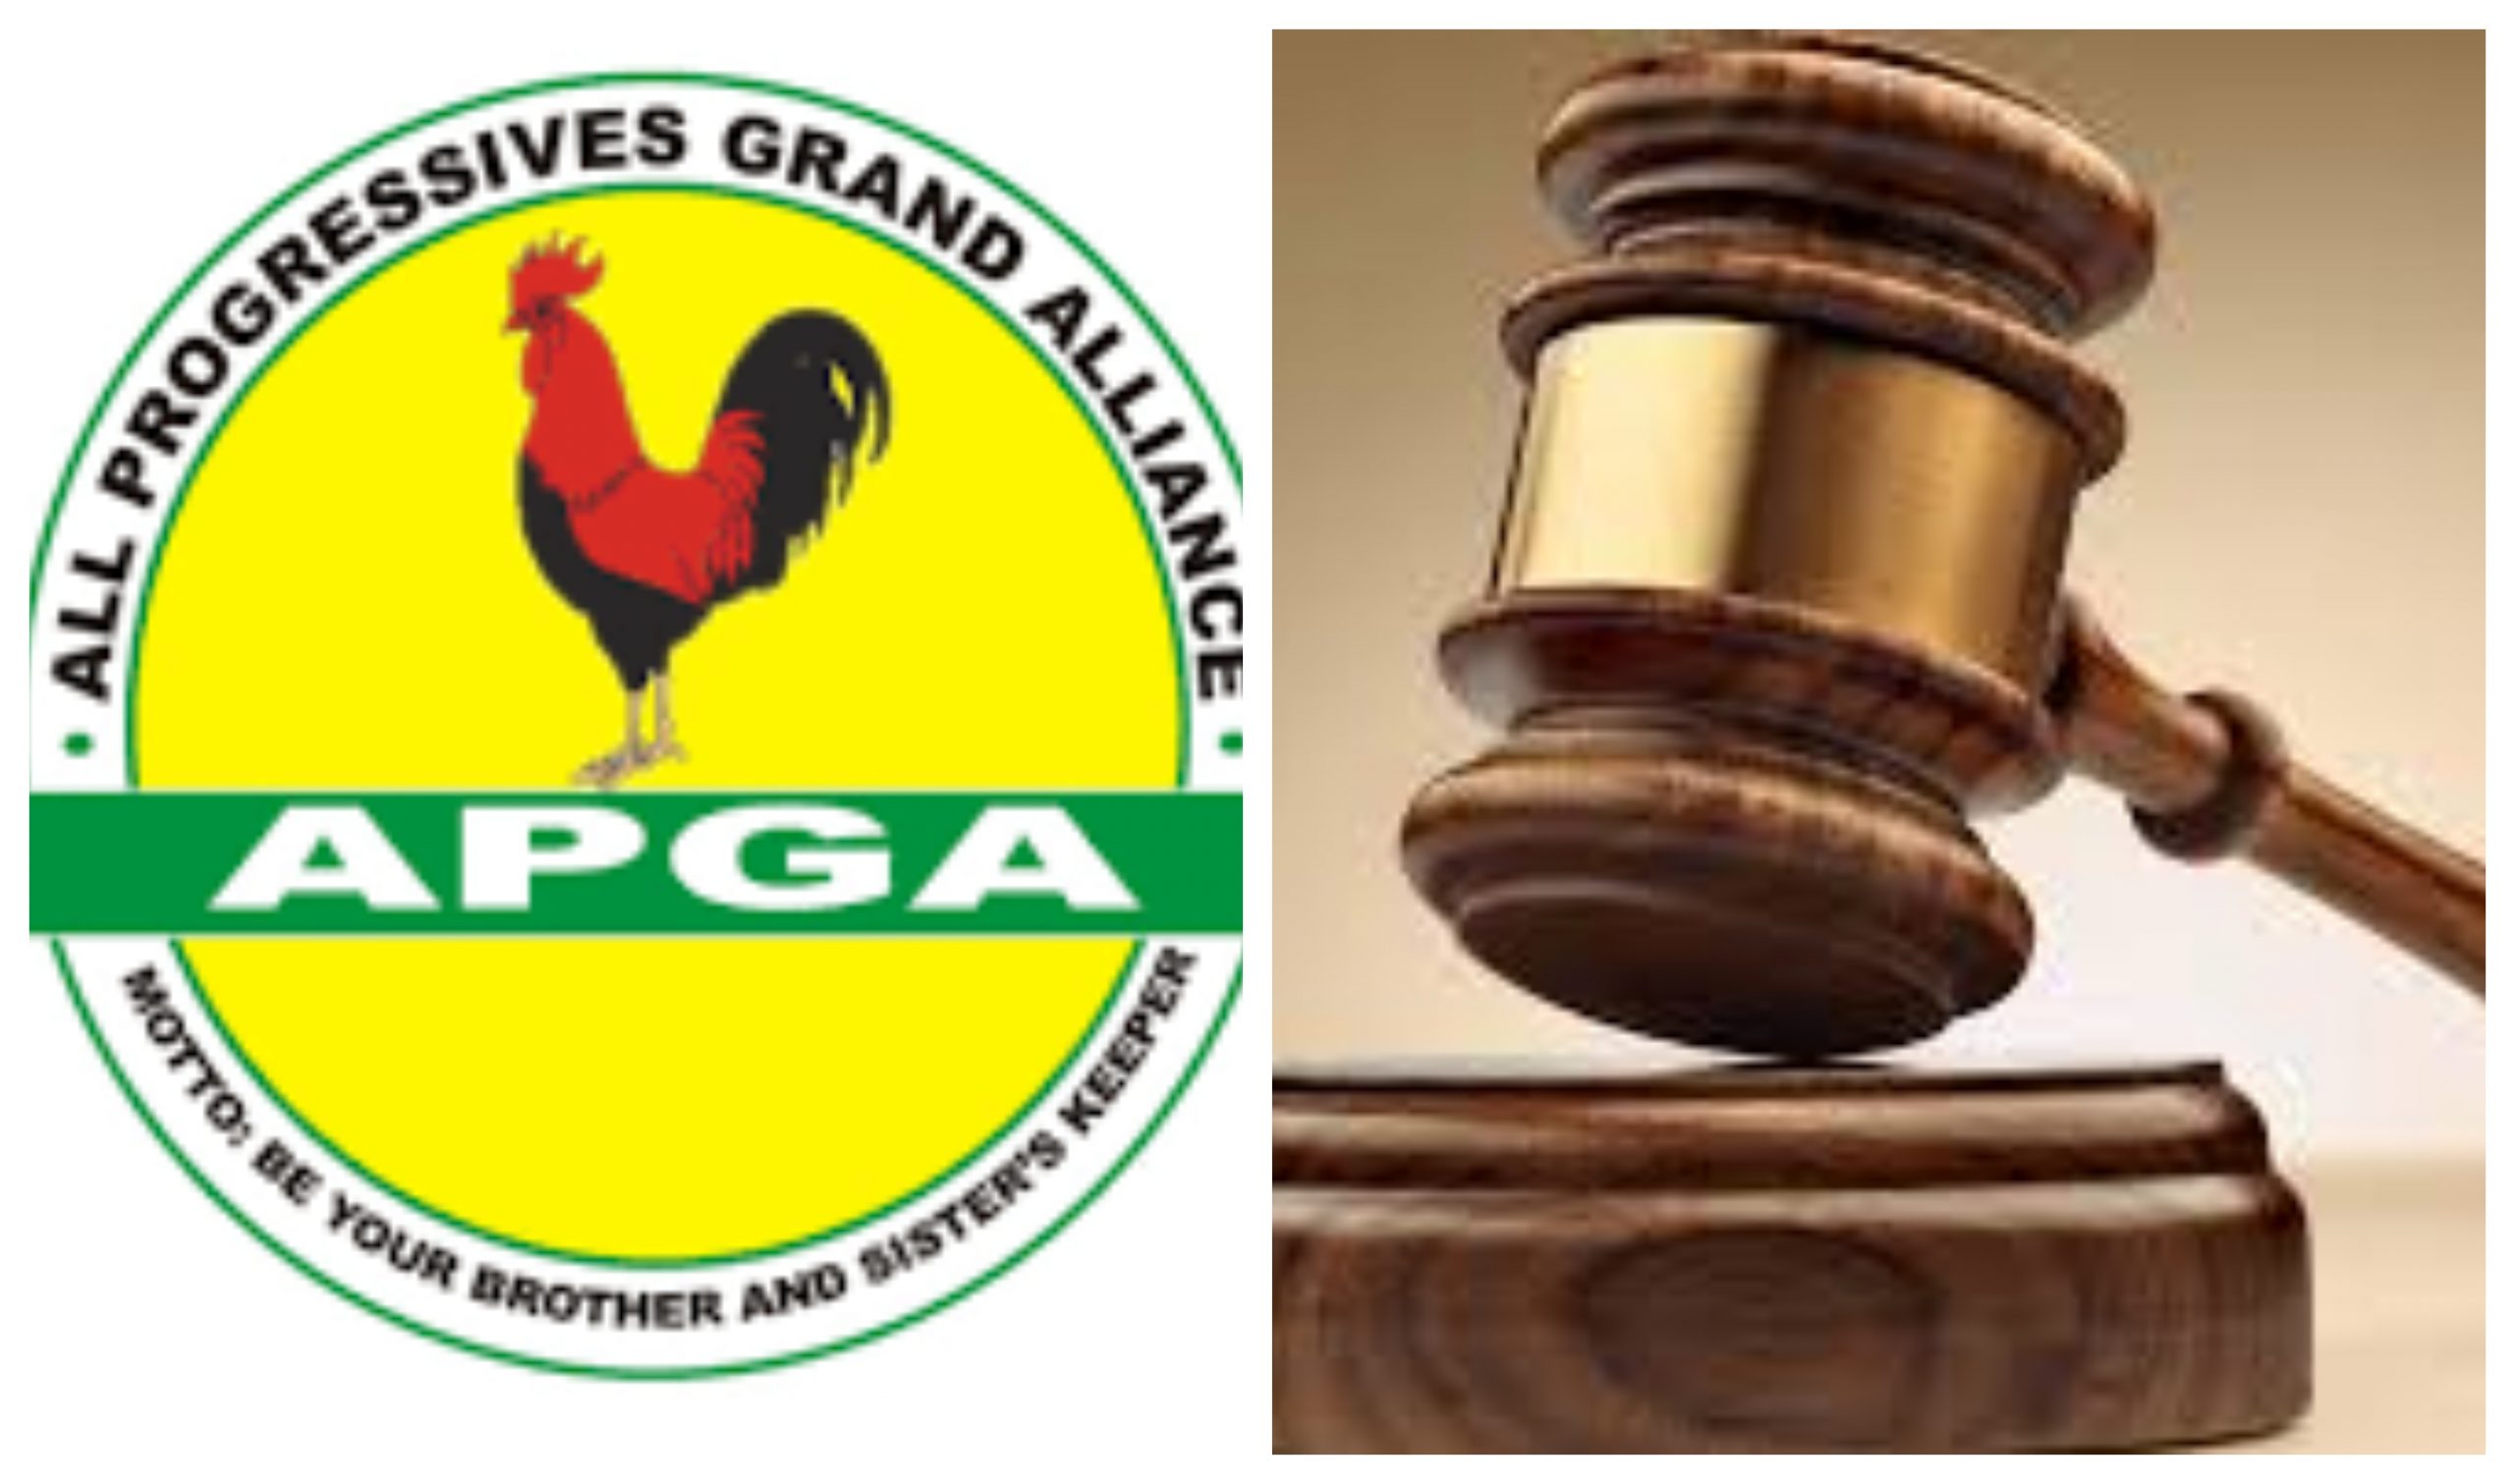 Apga and Court scaled